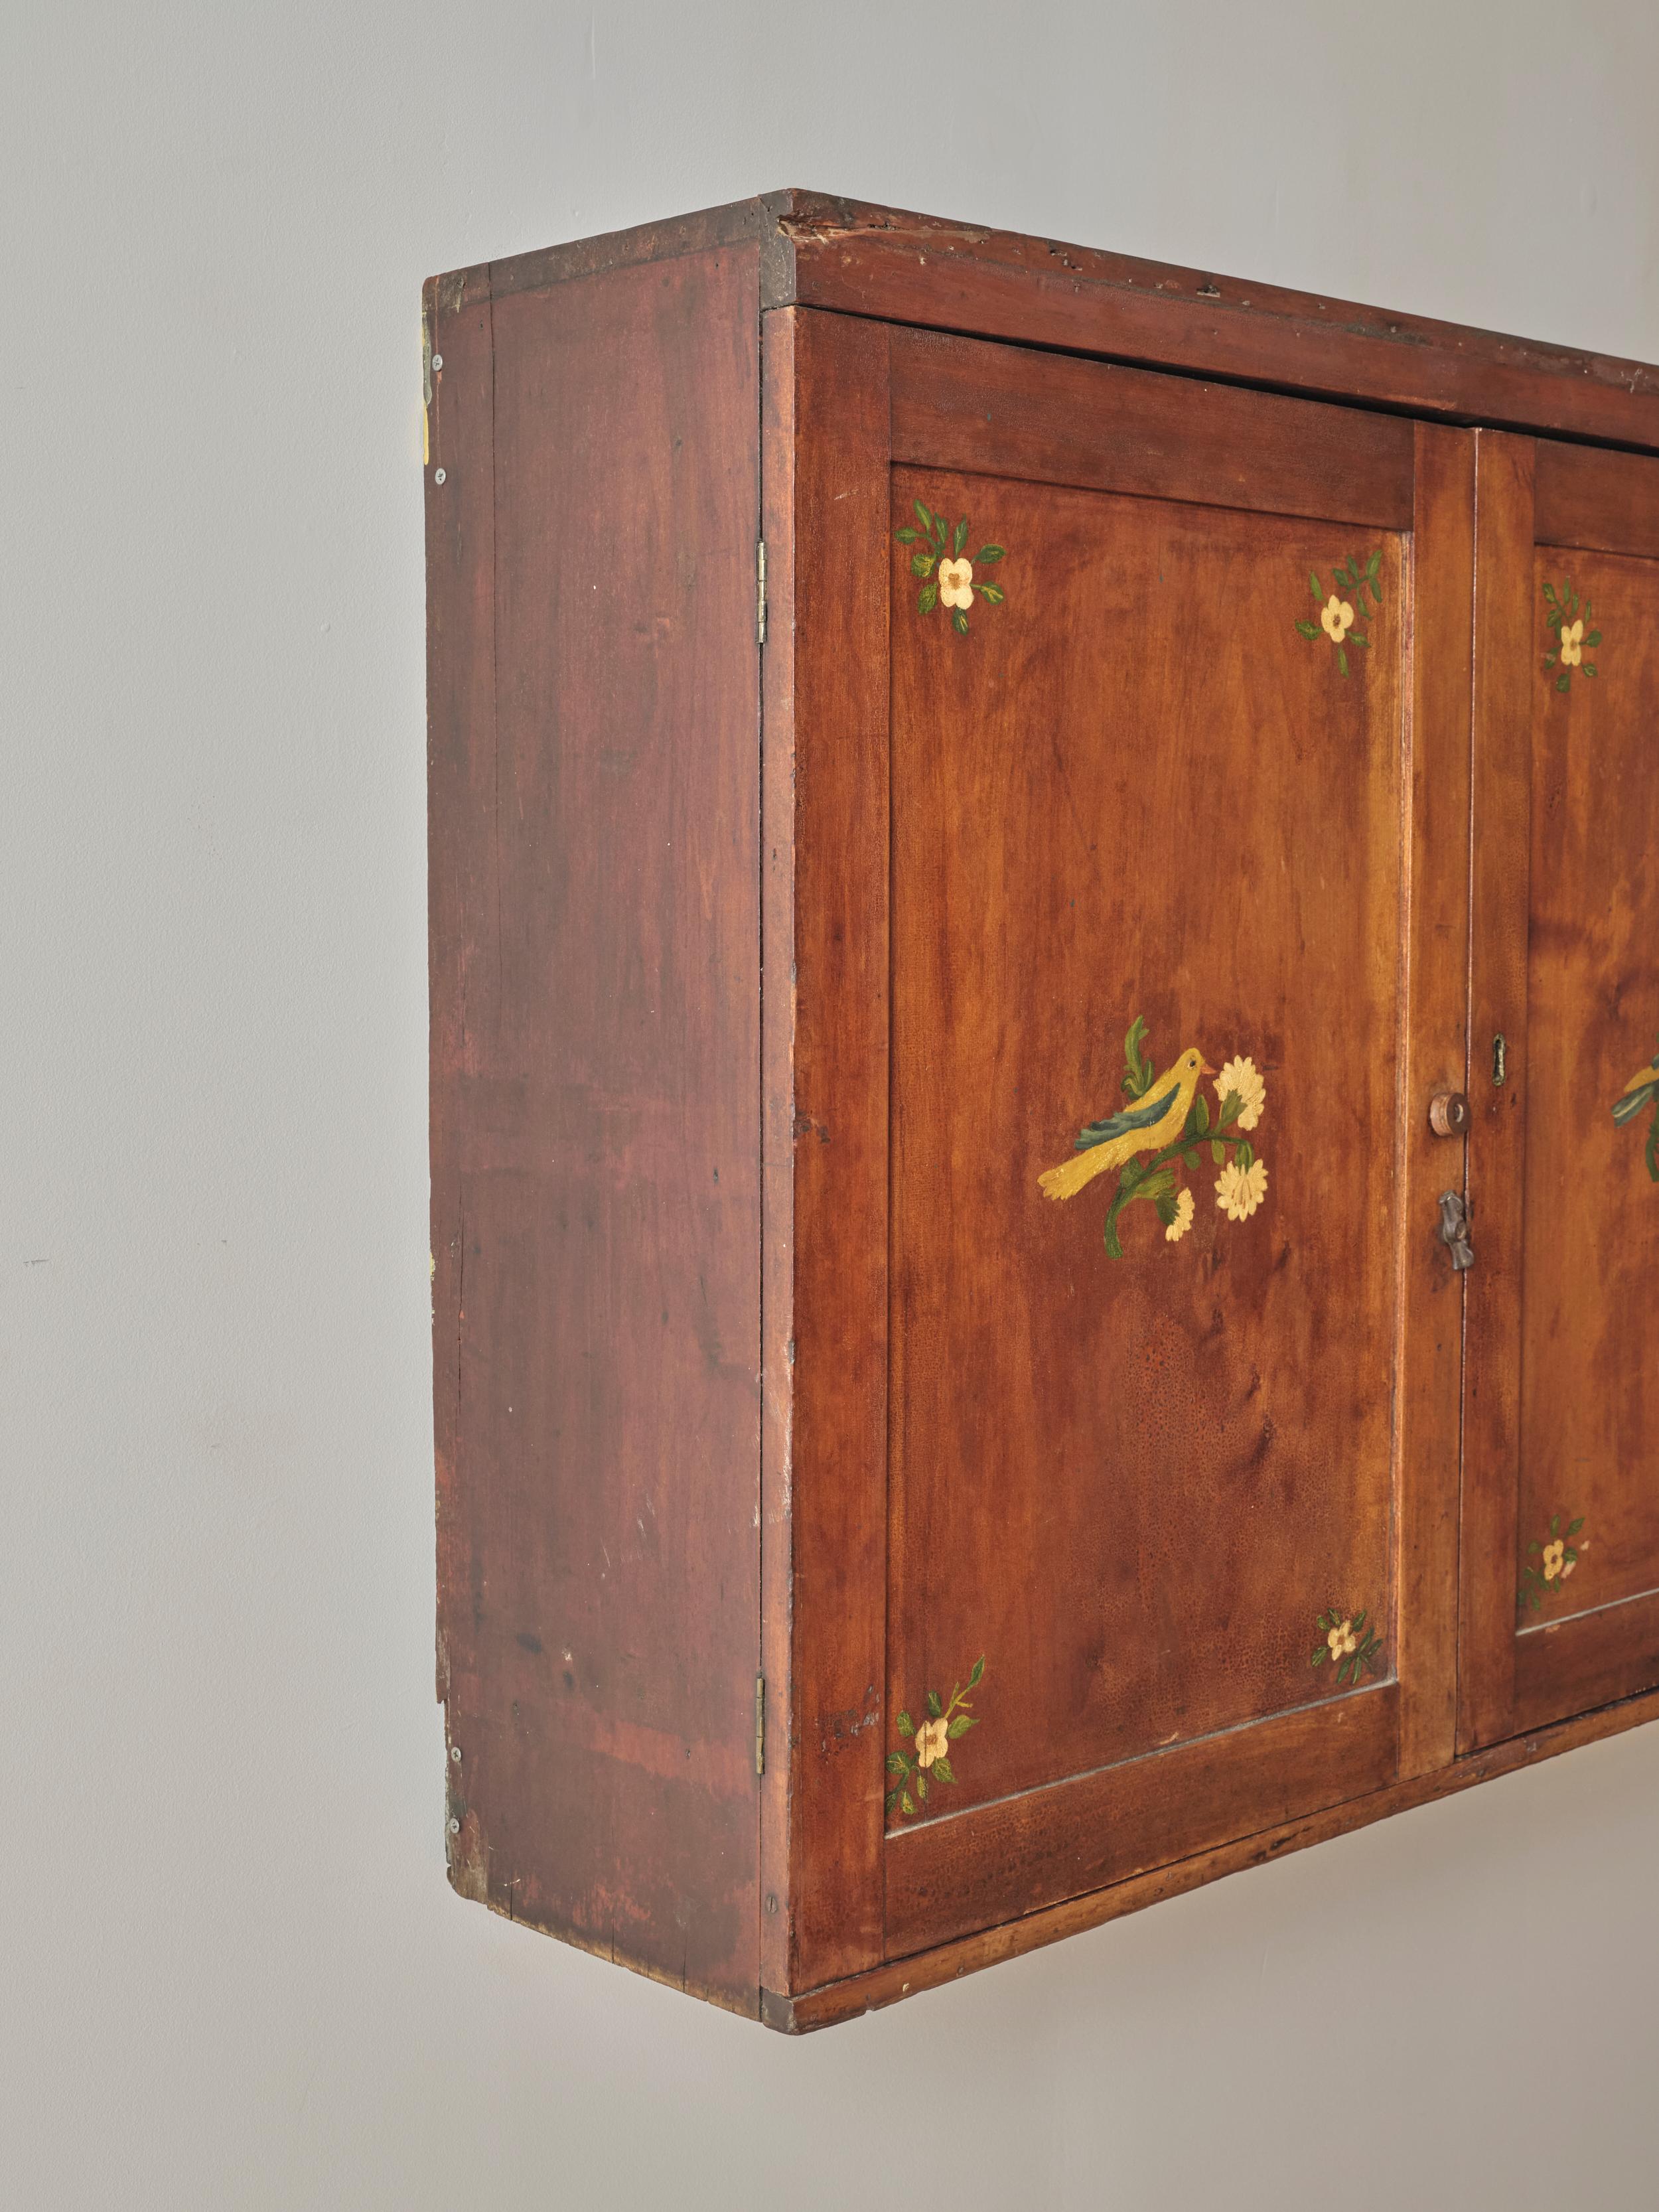 19th Century Two Door Hand Painted Wooden Cabinet In Good Condition For Sale In Long Island City, NY